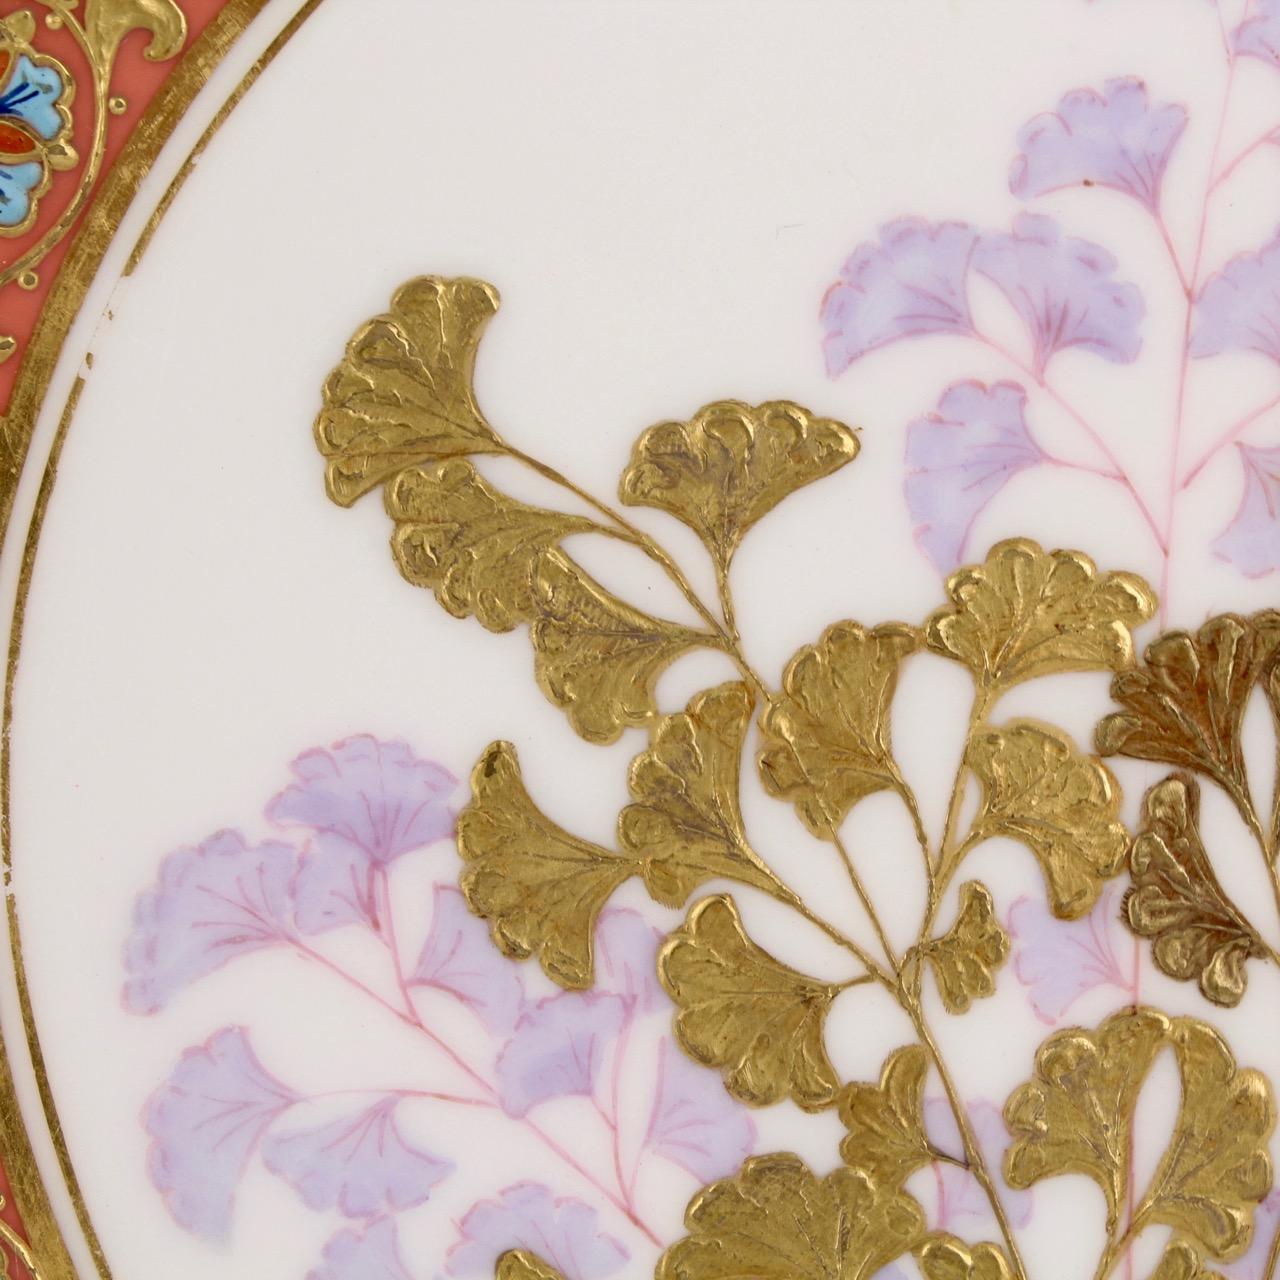 Derby Porcelain Aesthetic Period Gilt and Enameled Botanical Cabinet Plate Pair For Sale 2